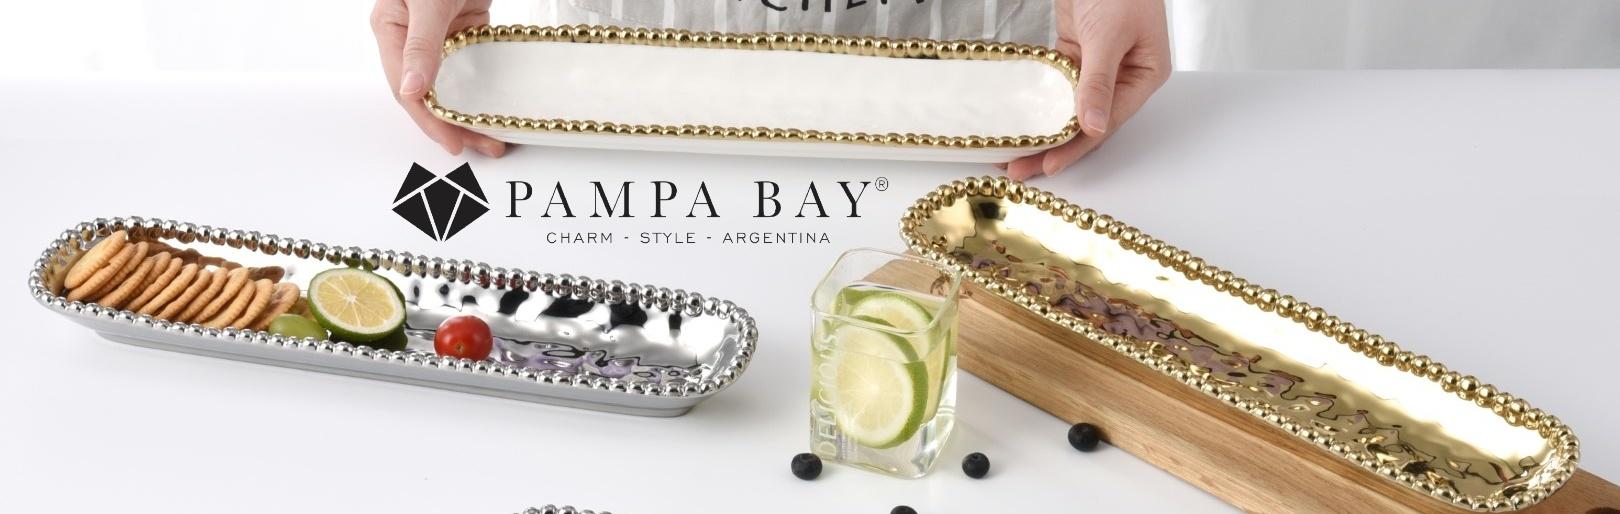 Pampa Bay lifestyle products slide 7